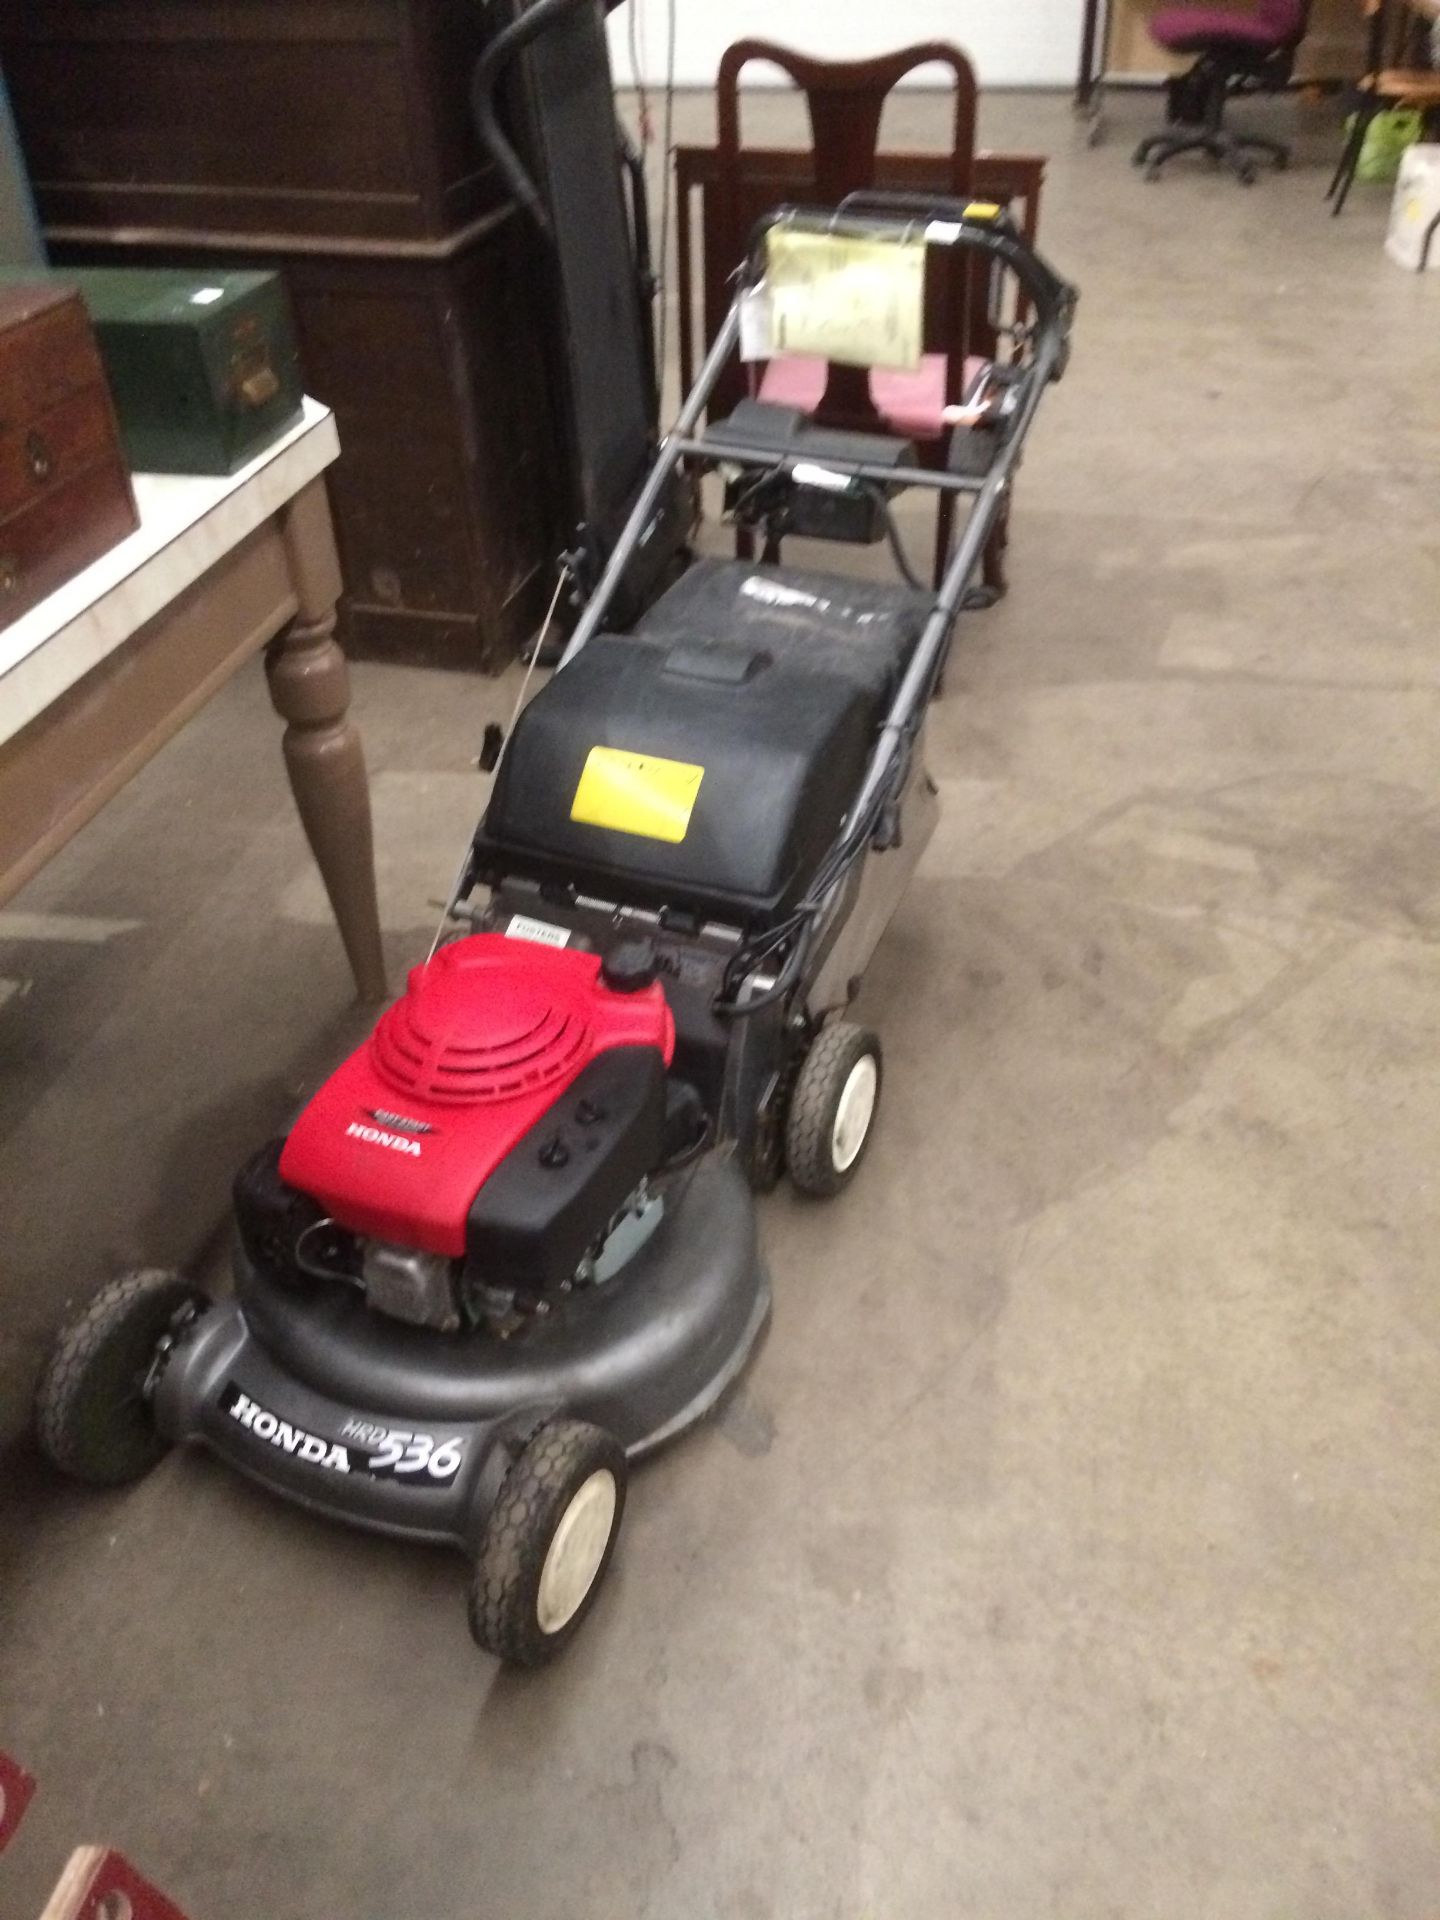 A Honda HRD 536 petrol rotary lawnmower with electric start, collection bag and manual. - Image 2 of 5